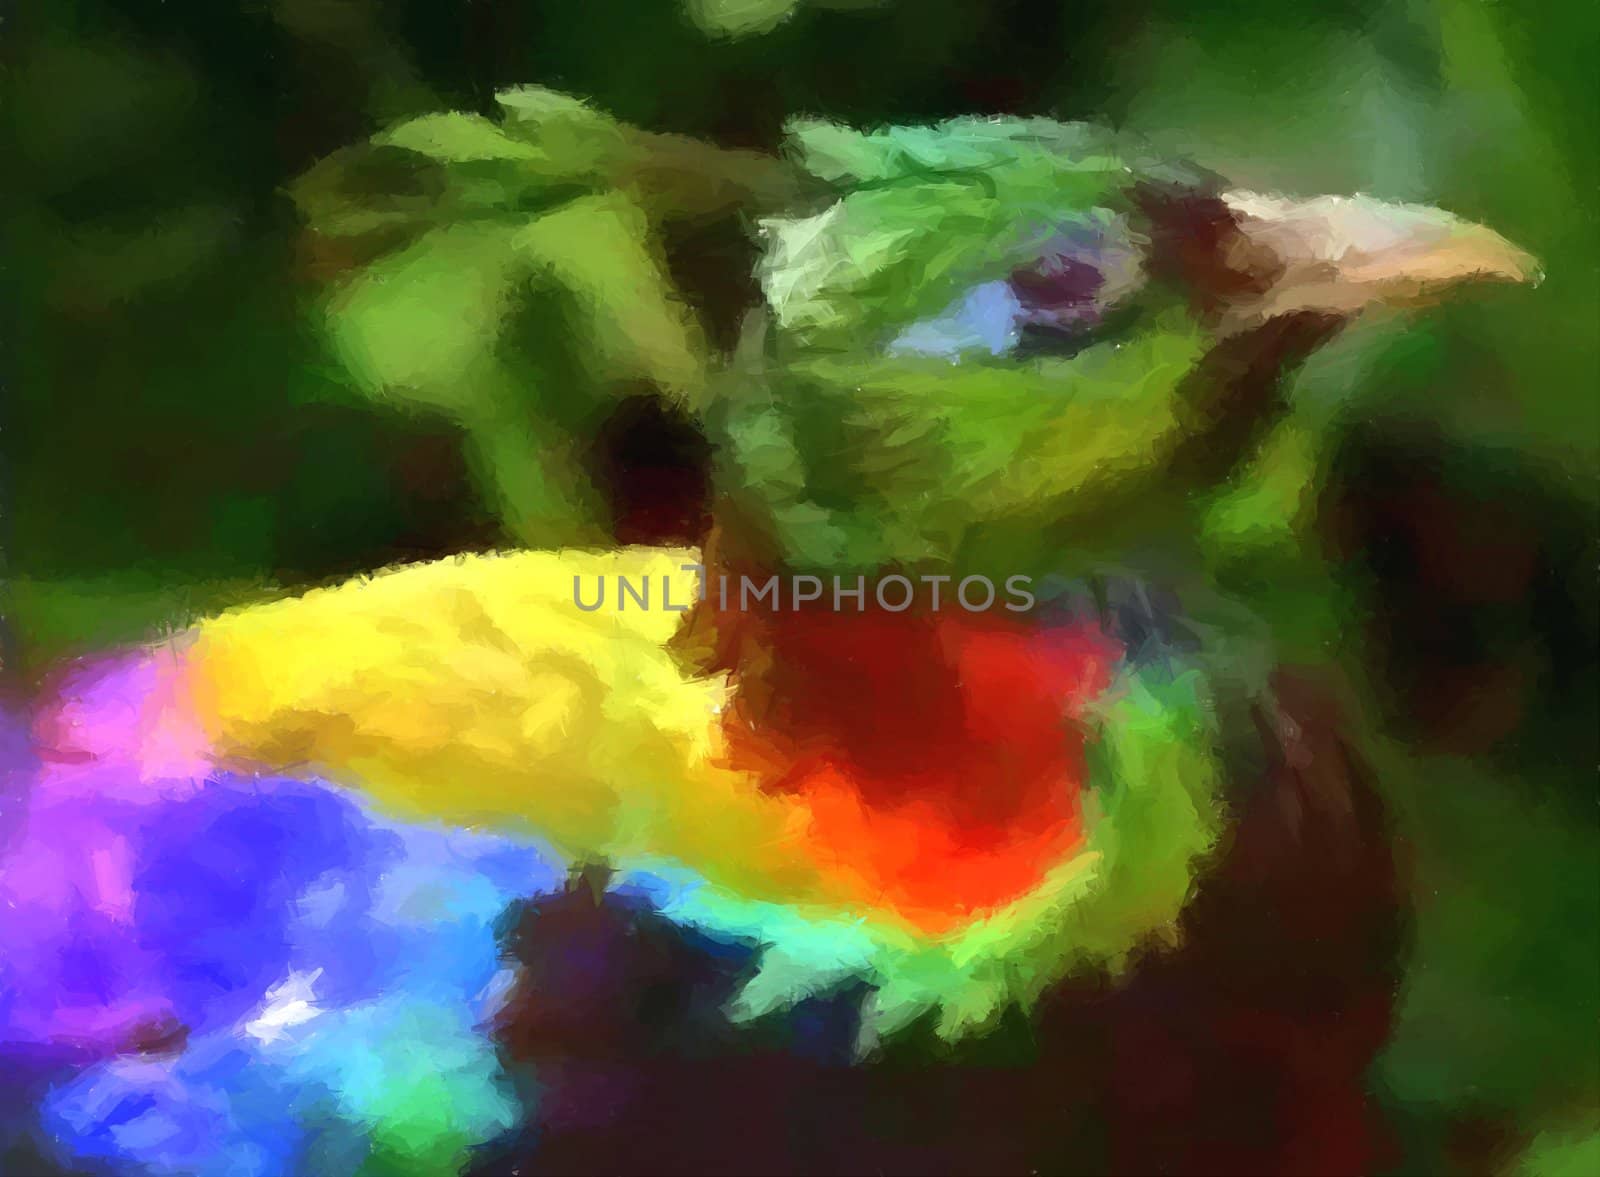 A spectacular bird with all the colors of the rainbow.